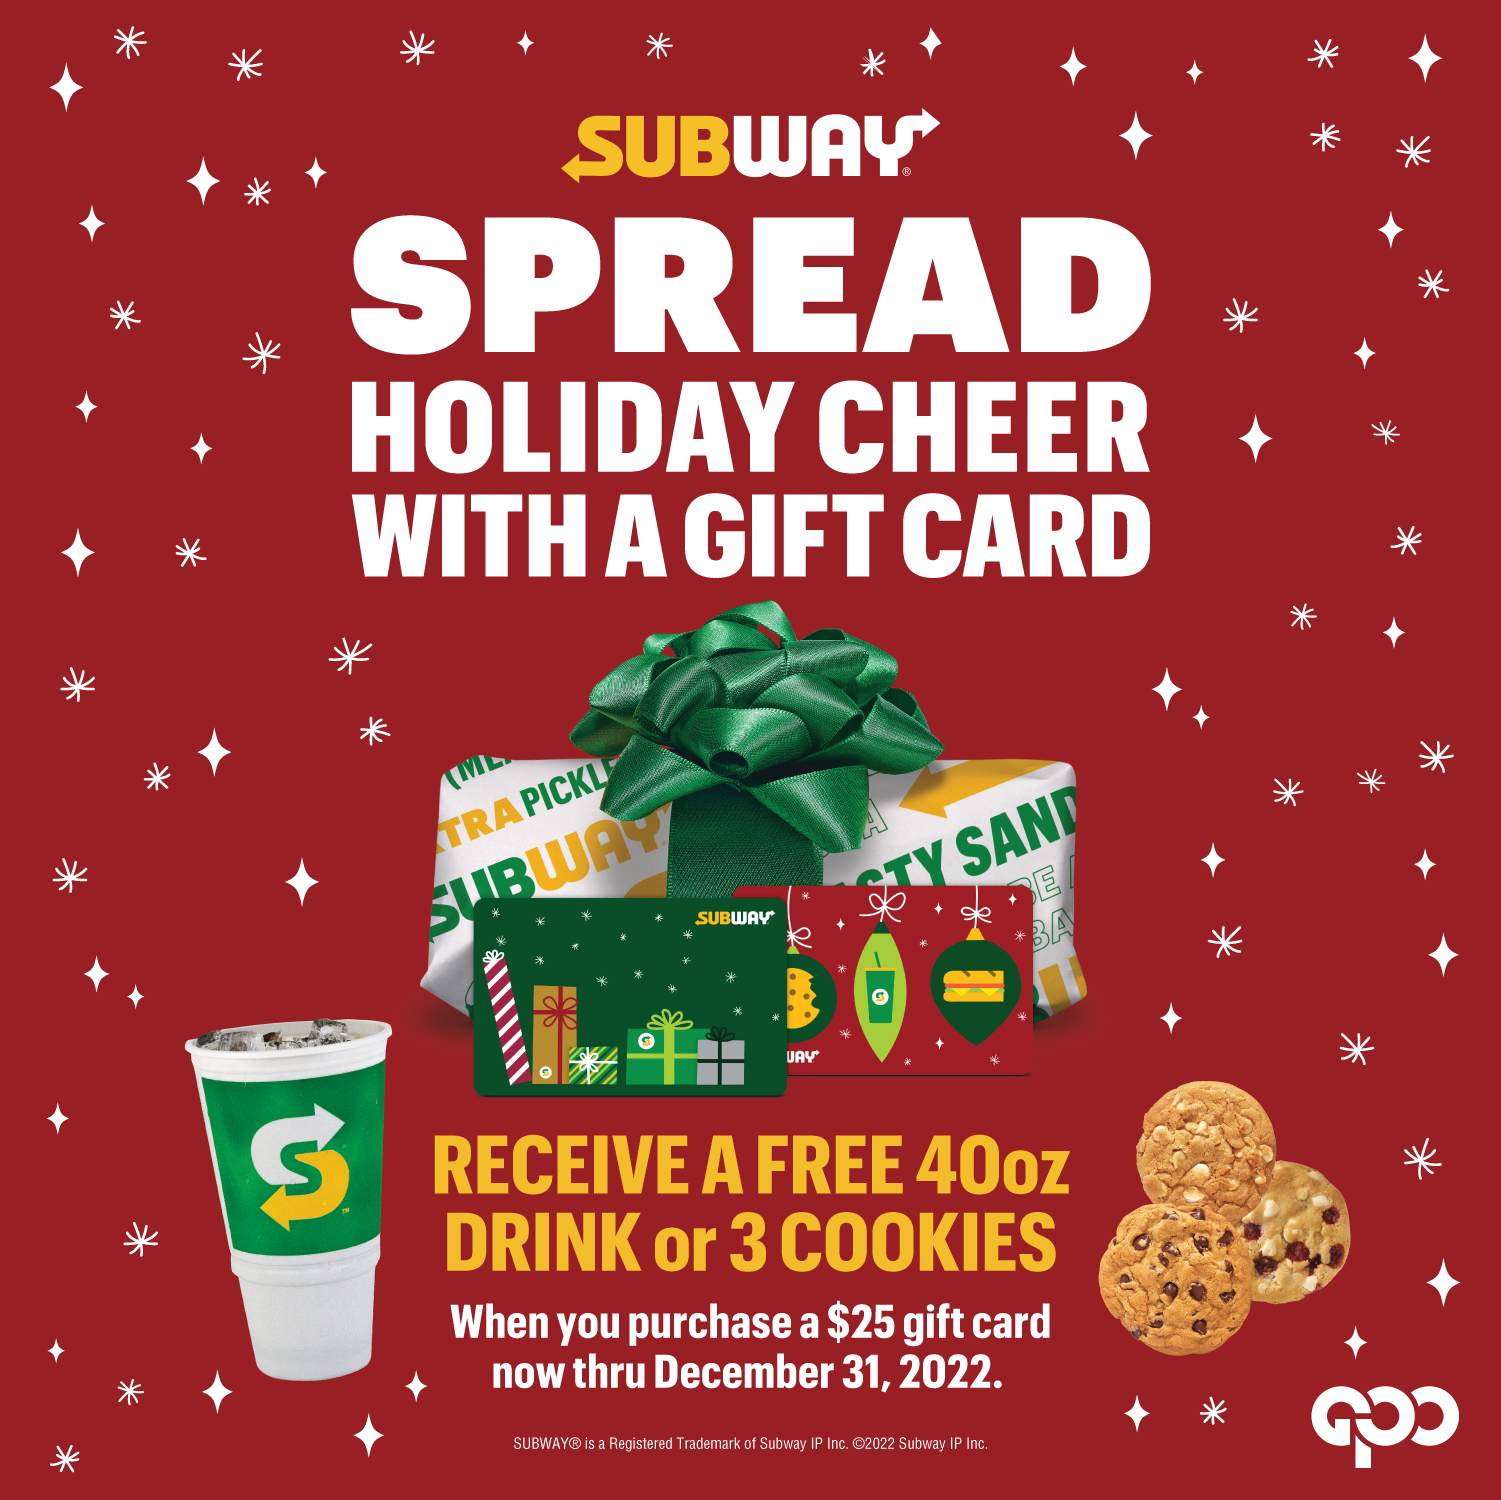 Subway FREE Fountain Drink or Cookies with $25 Gift Card Purchase: December 1 – December 31